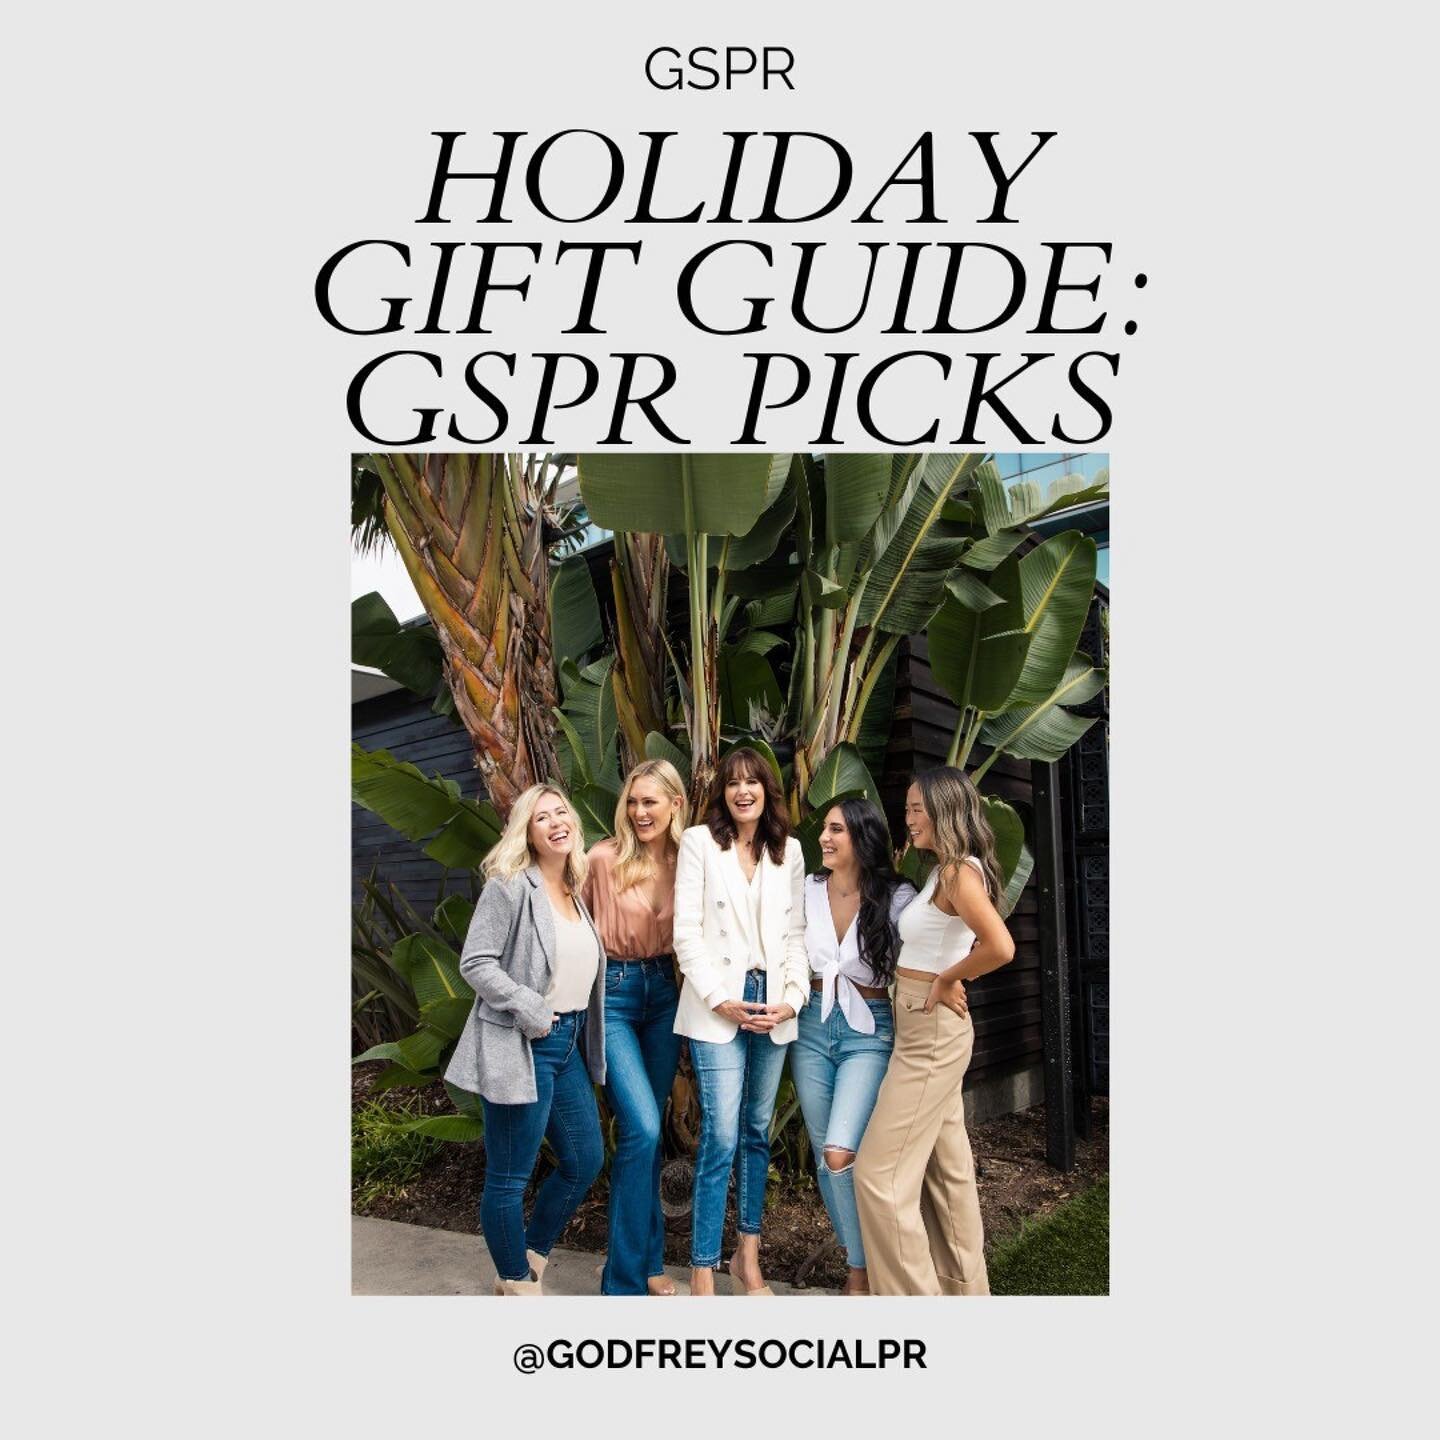 Our team gift guide is out! 

Get inspired for those final presents.

#Repost @godfreysocialpr
・・・
Part 2: GSPR Holiday Gift Guide Recs! 🛍

Swipe through to see our picks.

Full list on our blog, link in bio!

#publicrelations #giftguide #giftideas 